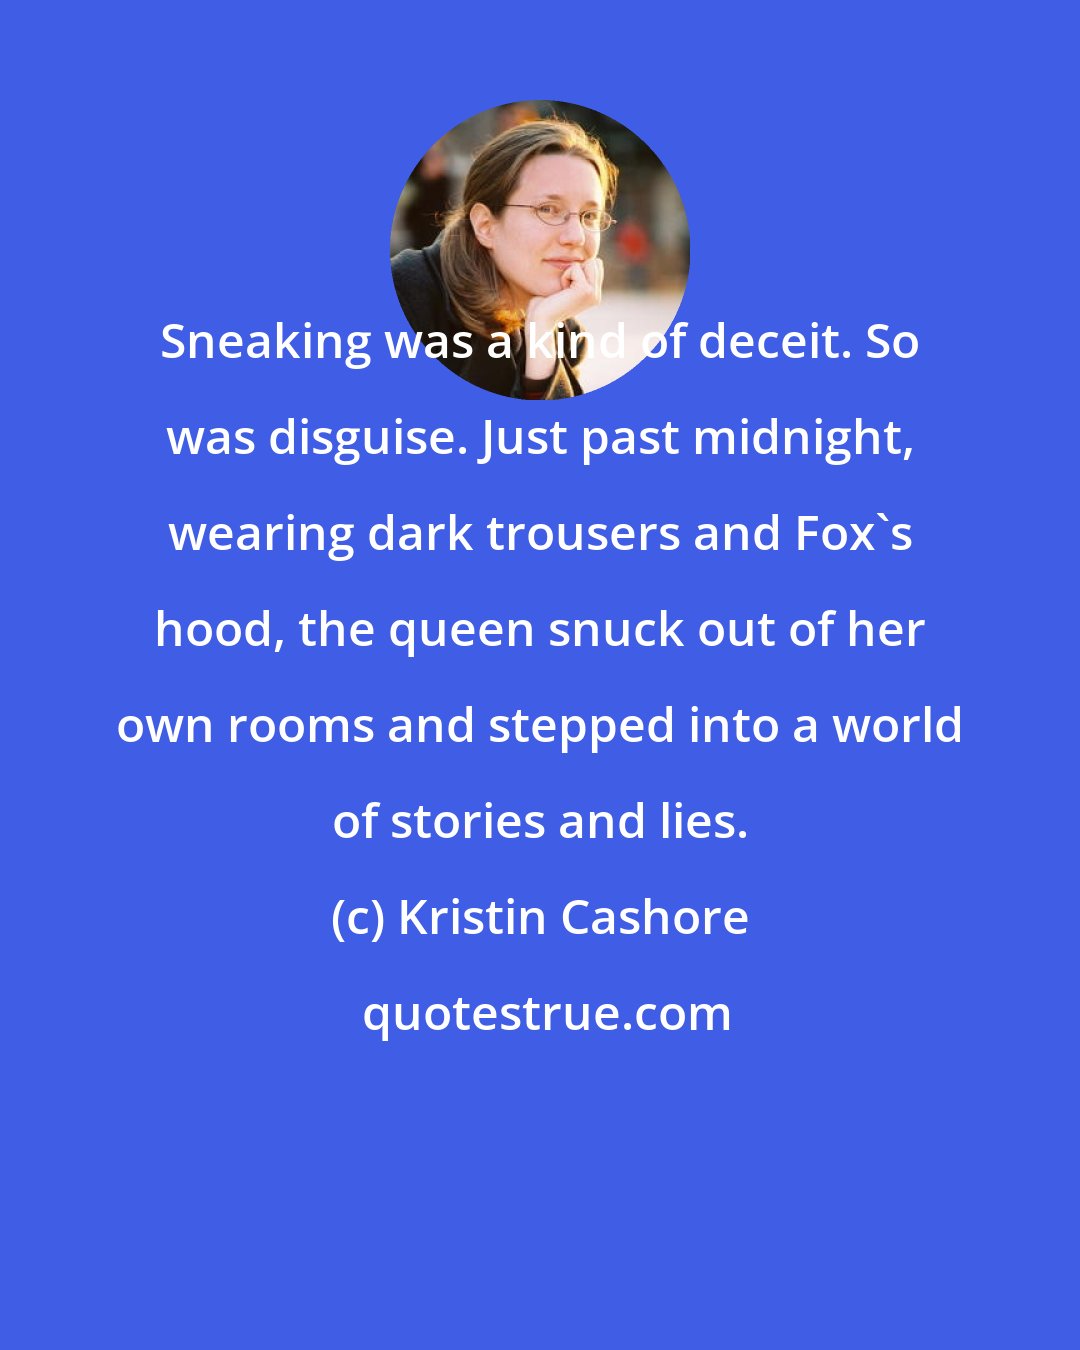 Kristin Cashore: Sneaking was a kind of deceit. So was disguise. Just past midnight, wearing dark trousers and Fox's hood, the queen snuck out of her own rooms and stepped into a world of stories and lies.